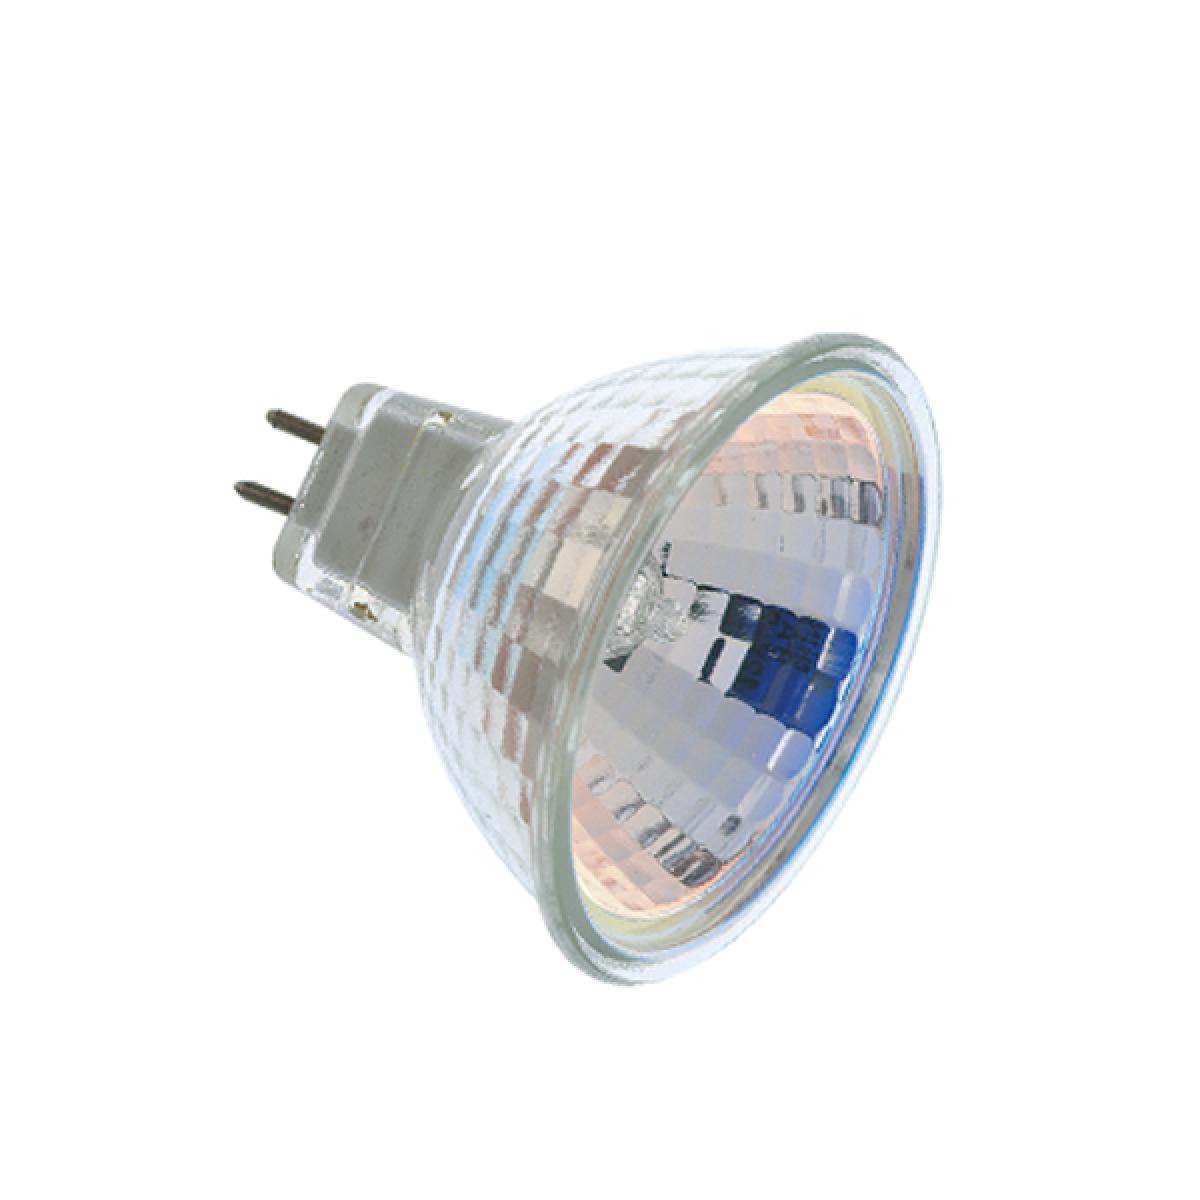 Replacement for Satco S3451 35 Watt Halogen MR16 FMW Miniature 2 Pin Round base 12 Volt - NOW LED S11392